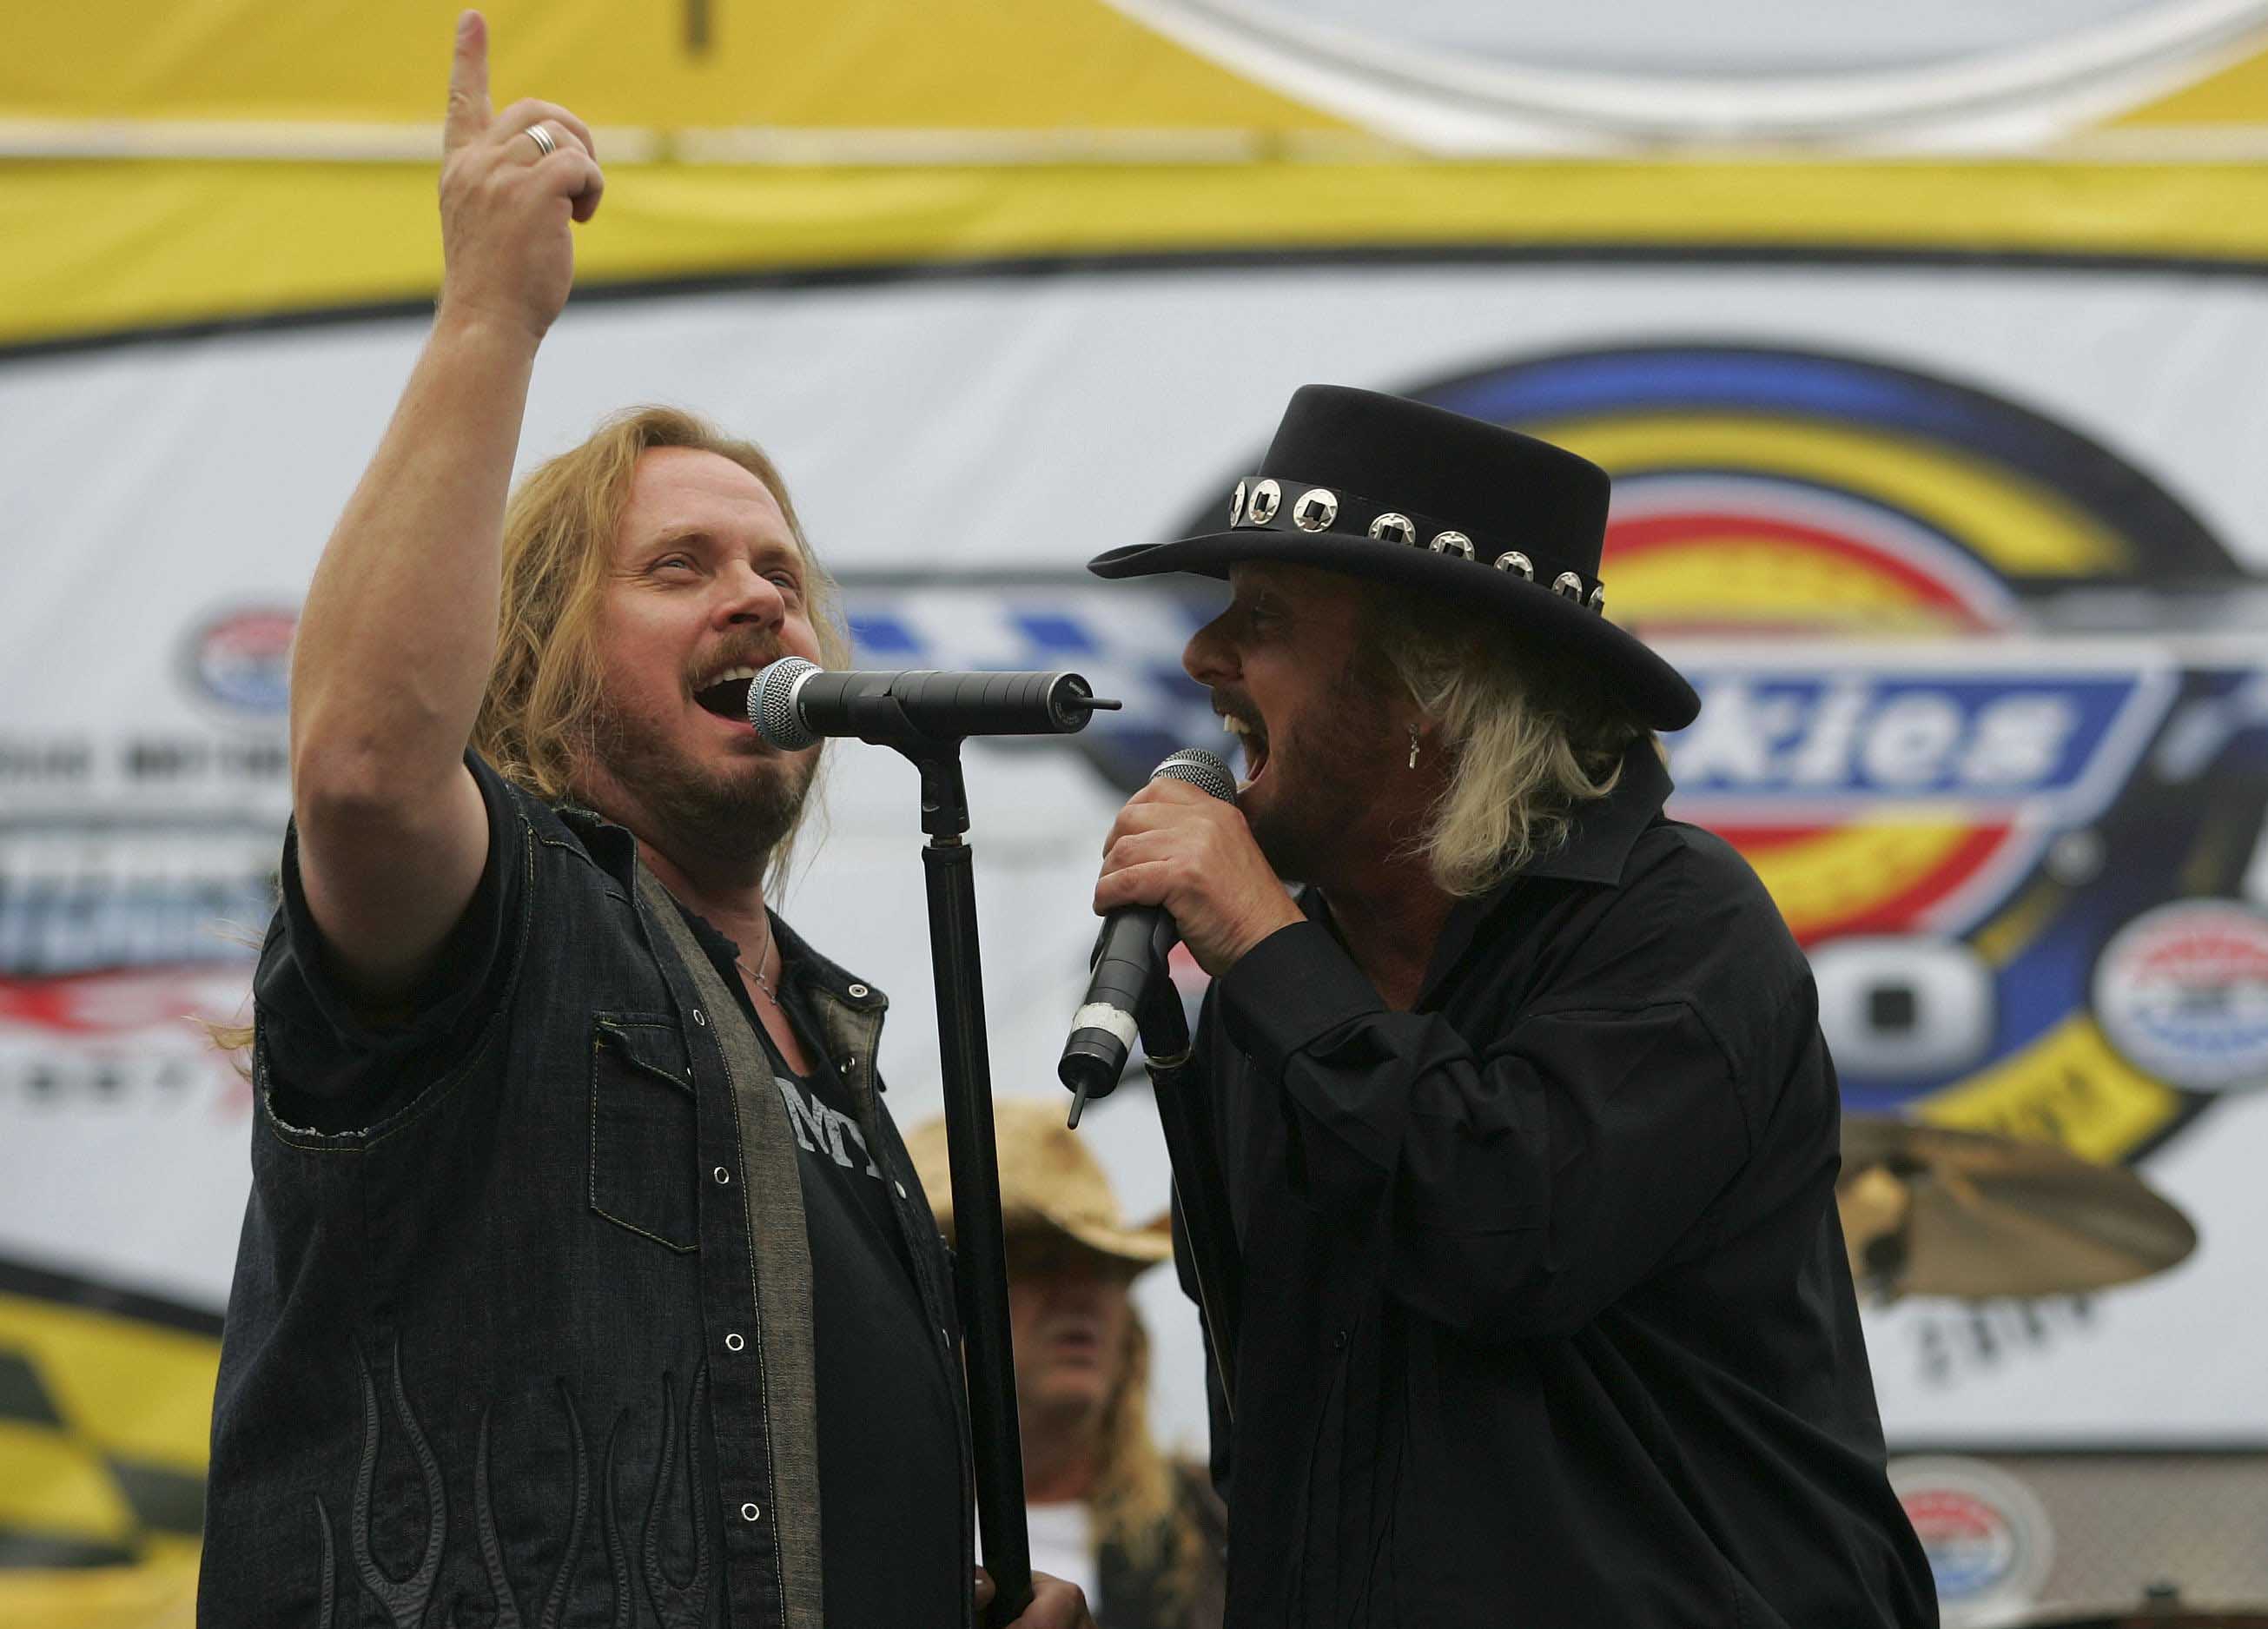 FORT WORTH, TX - NOVEMBER 05: (L-R) Jimmy Van Zant and Donnie Van Zant, of the group Van Zant, sing prior to the NASCAR Nextel Cup Series Dickies 500, on November 5, 2006 at Texas Motor Speedway in Fort Worth, Texas. (Photo by Todd Warshaw/Getty Images for NASCAR)